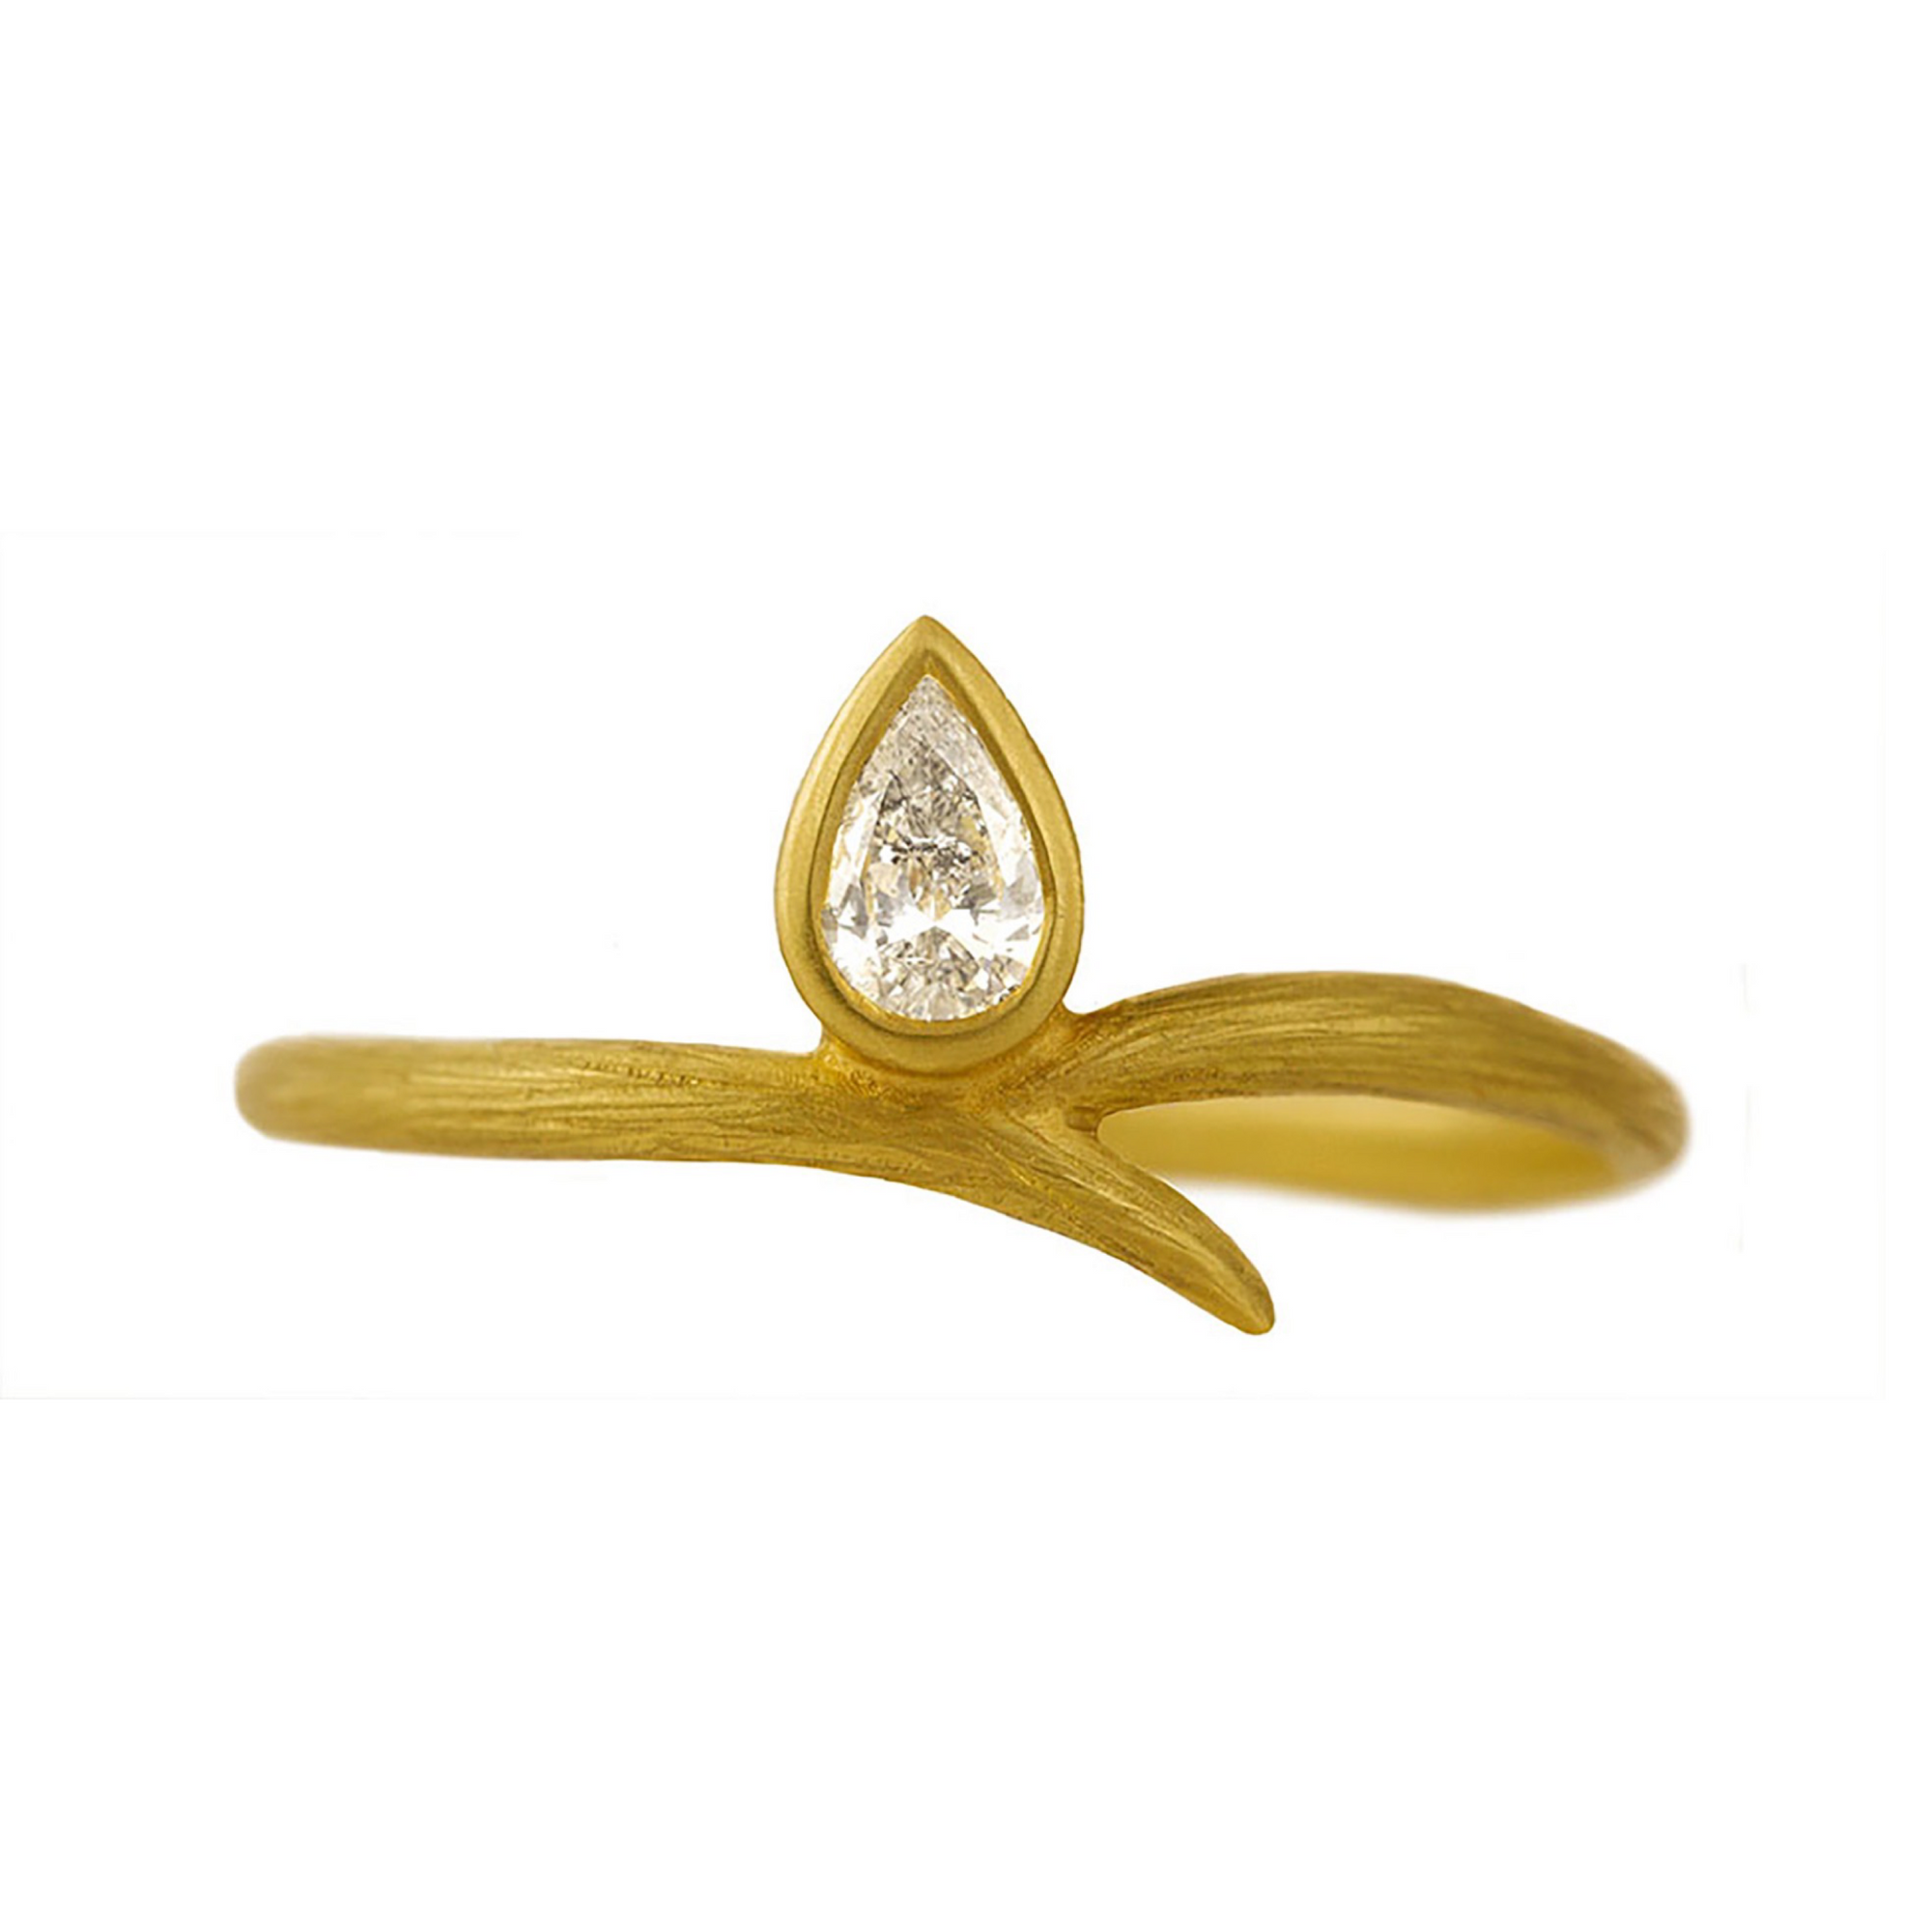 Petite Vine Diamond Ring by Laurie Kaiser available at Talisman Collection Fine Jewelers in El Dorado Hills, CA and online. Crafted from 18k yellow gold, this ring features a single pear-shaped white diamond with a weight of 0.12 cts. The diamond is set on a delicate vine-like band, which creates a natural and elegant look; perfect for everyday wear. 